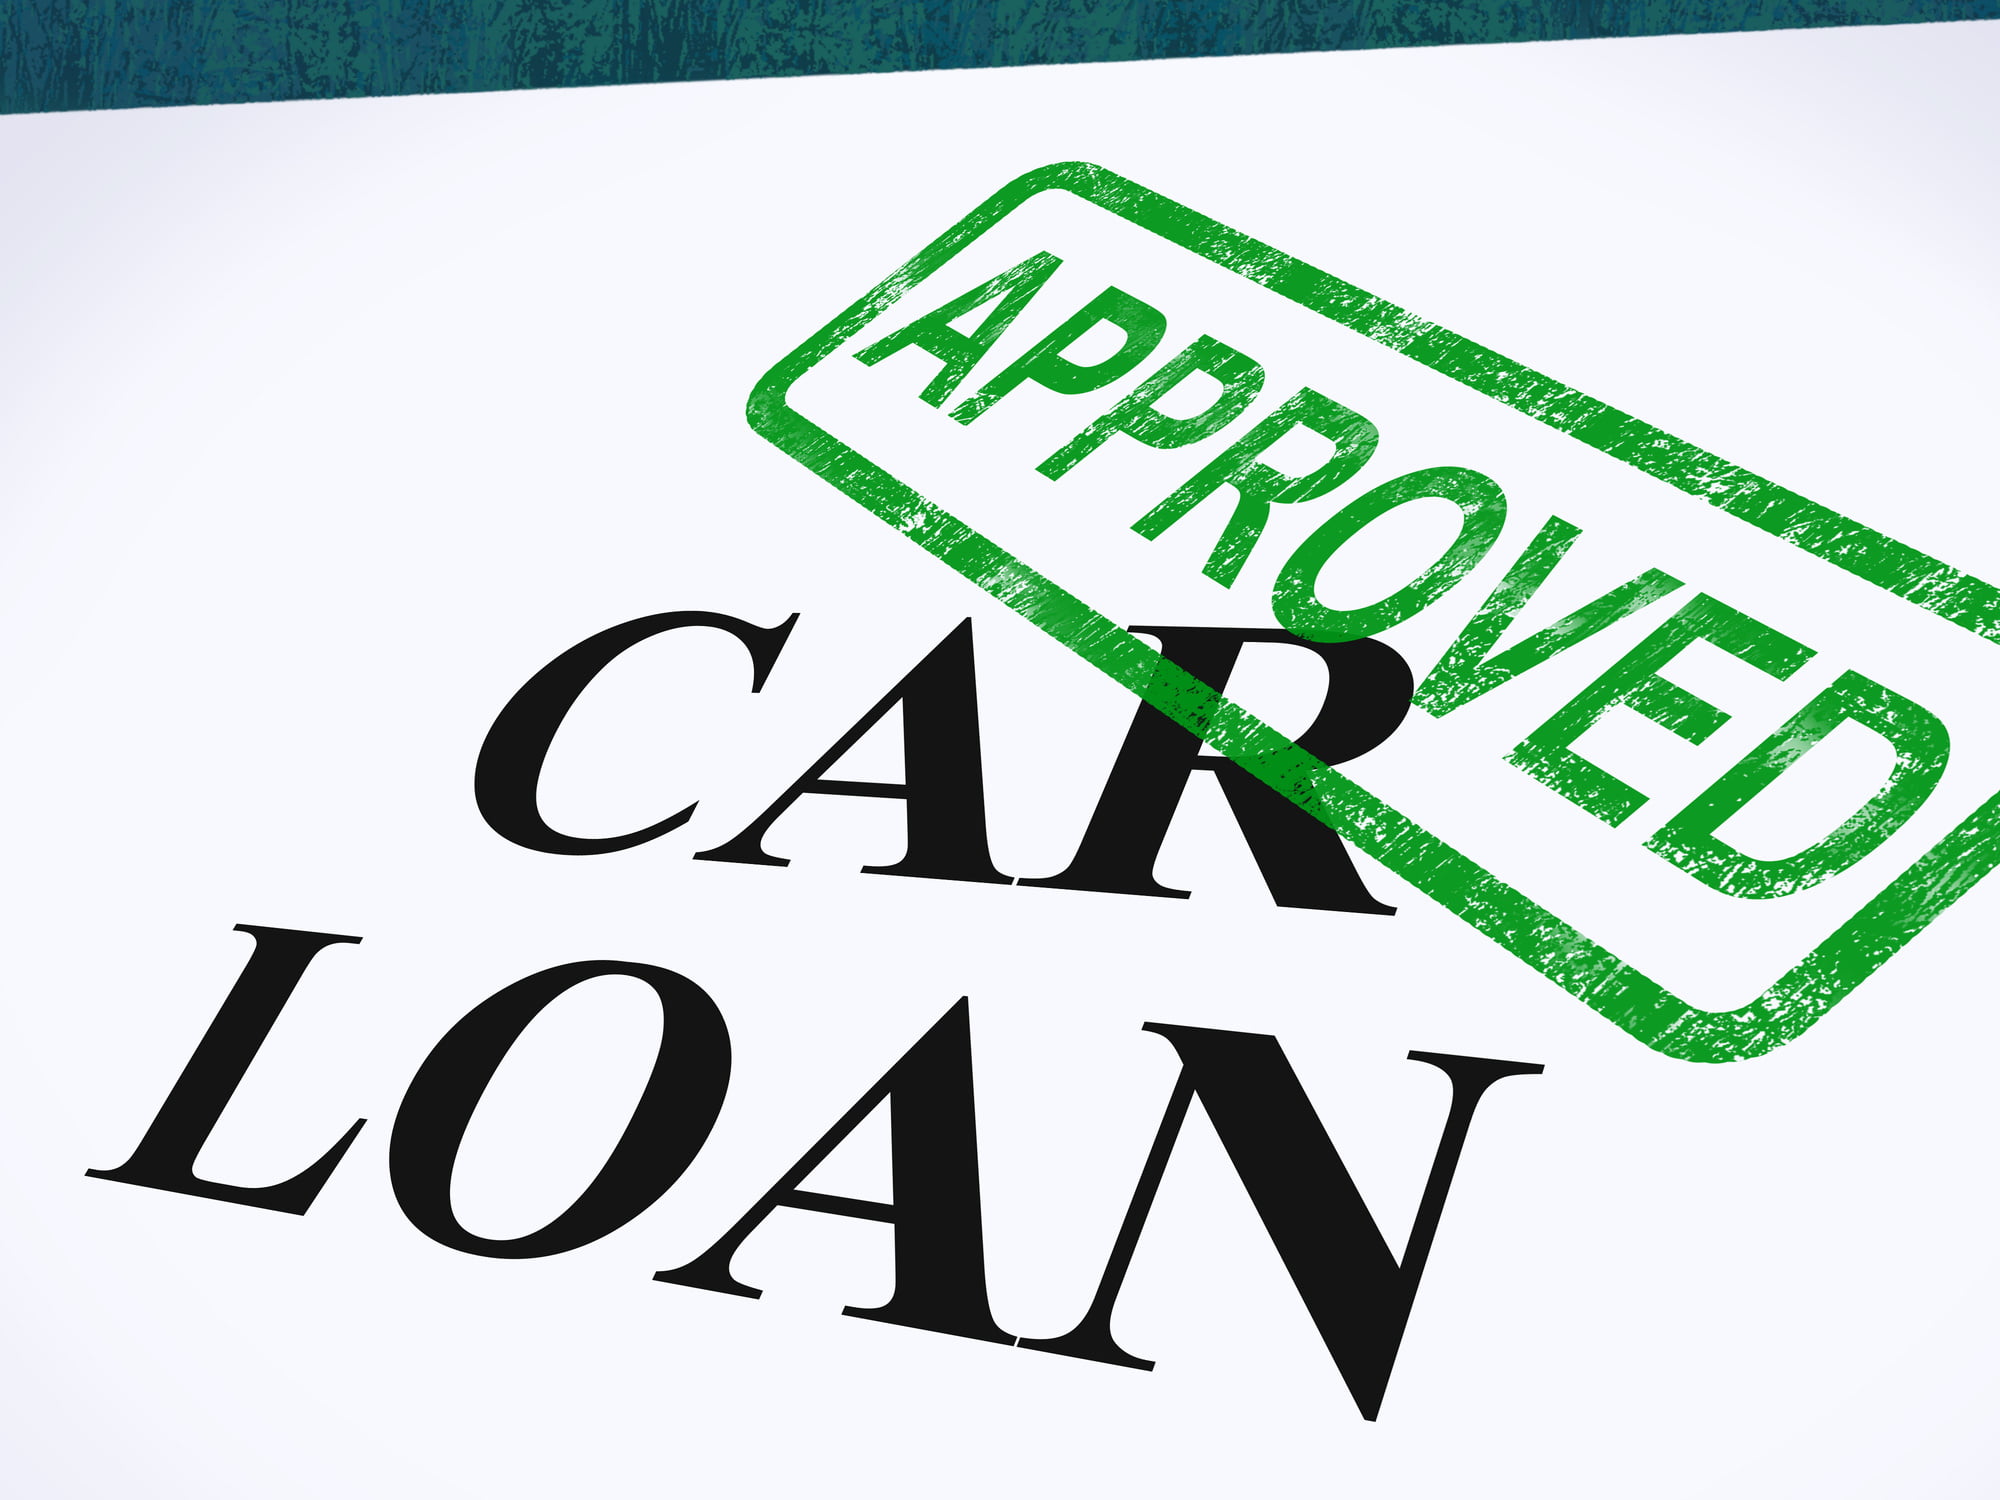 When it comes to getting instant access to cash, a car title loan is a great option. Here's a quick guide on how to secure one.